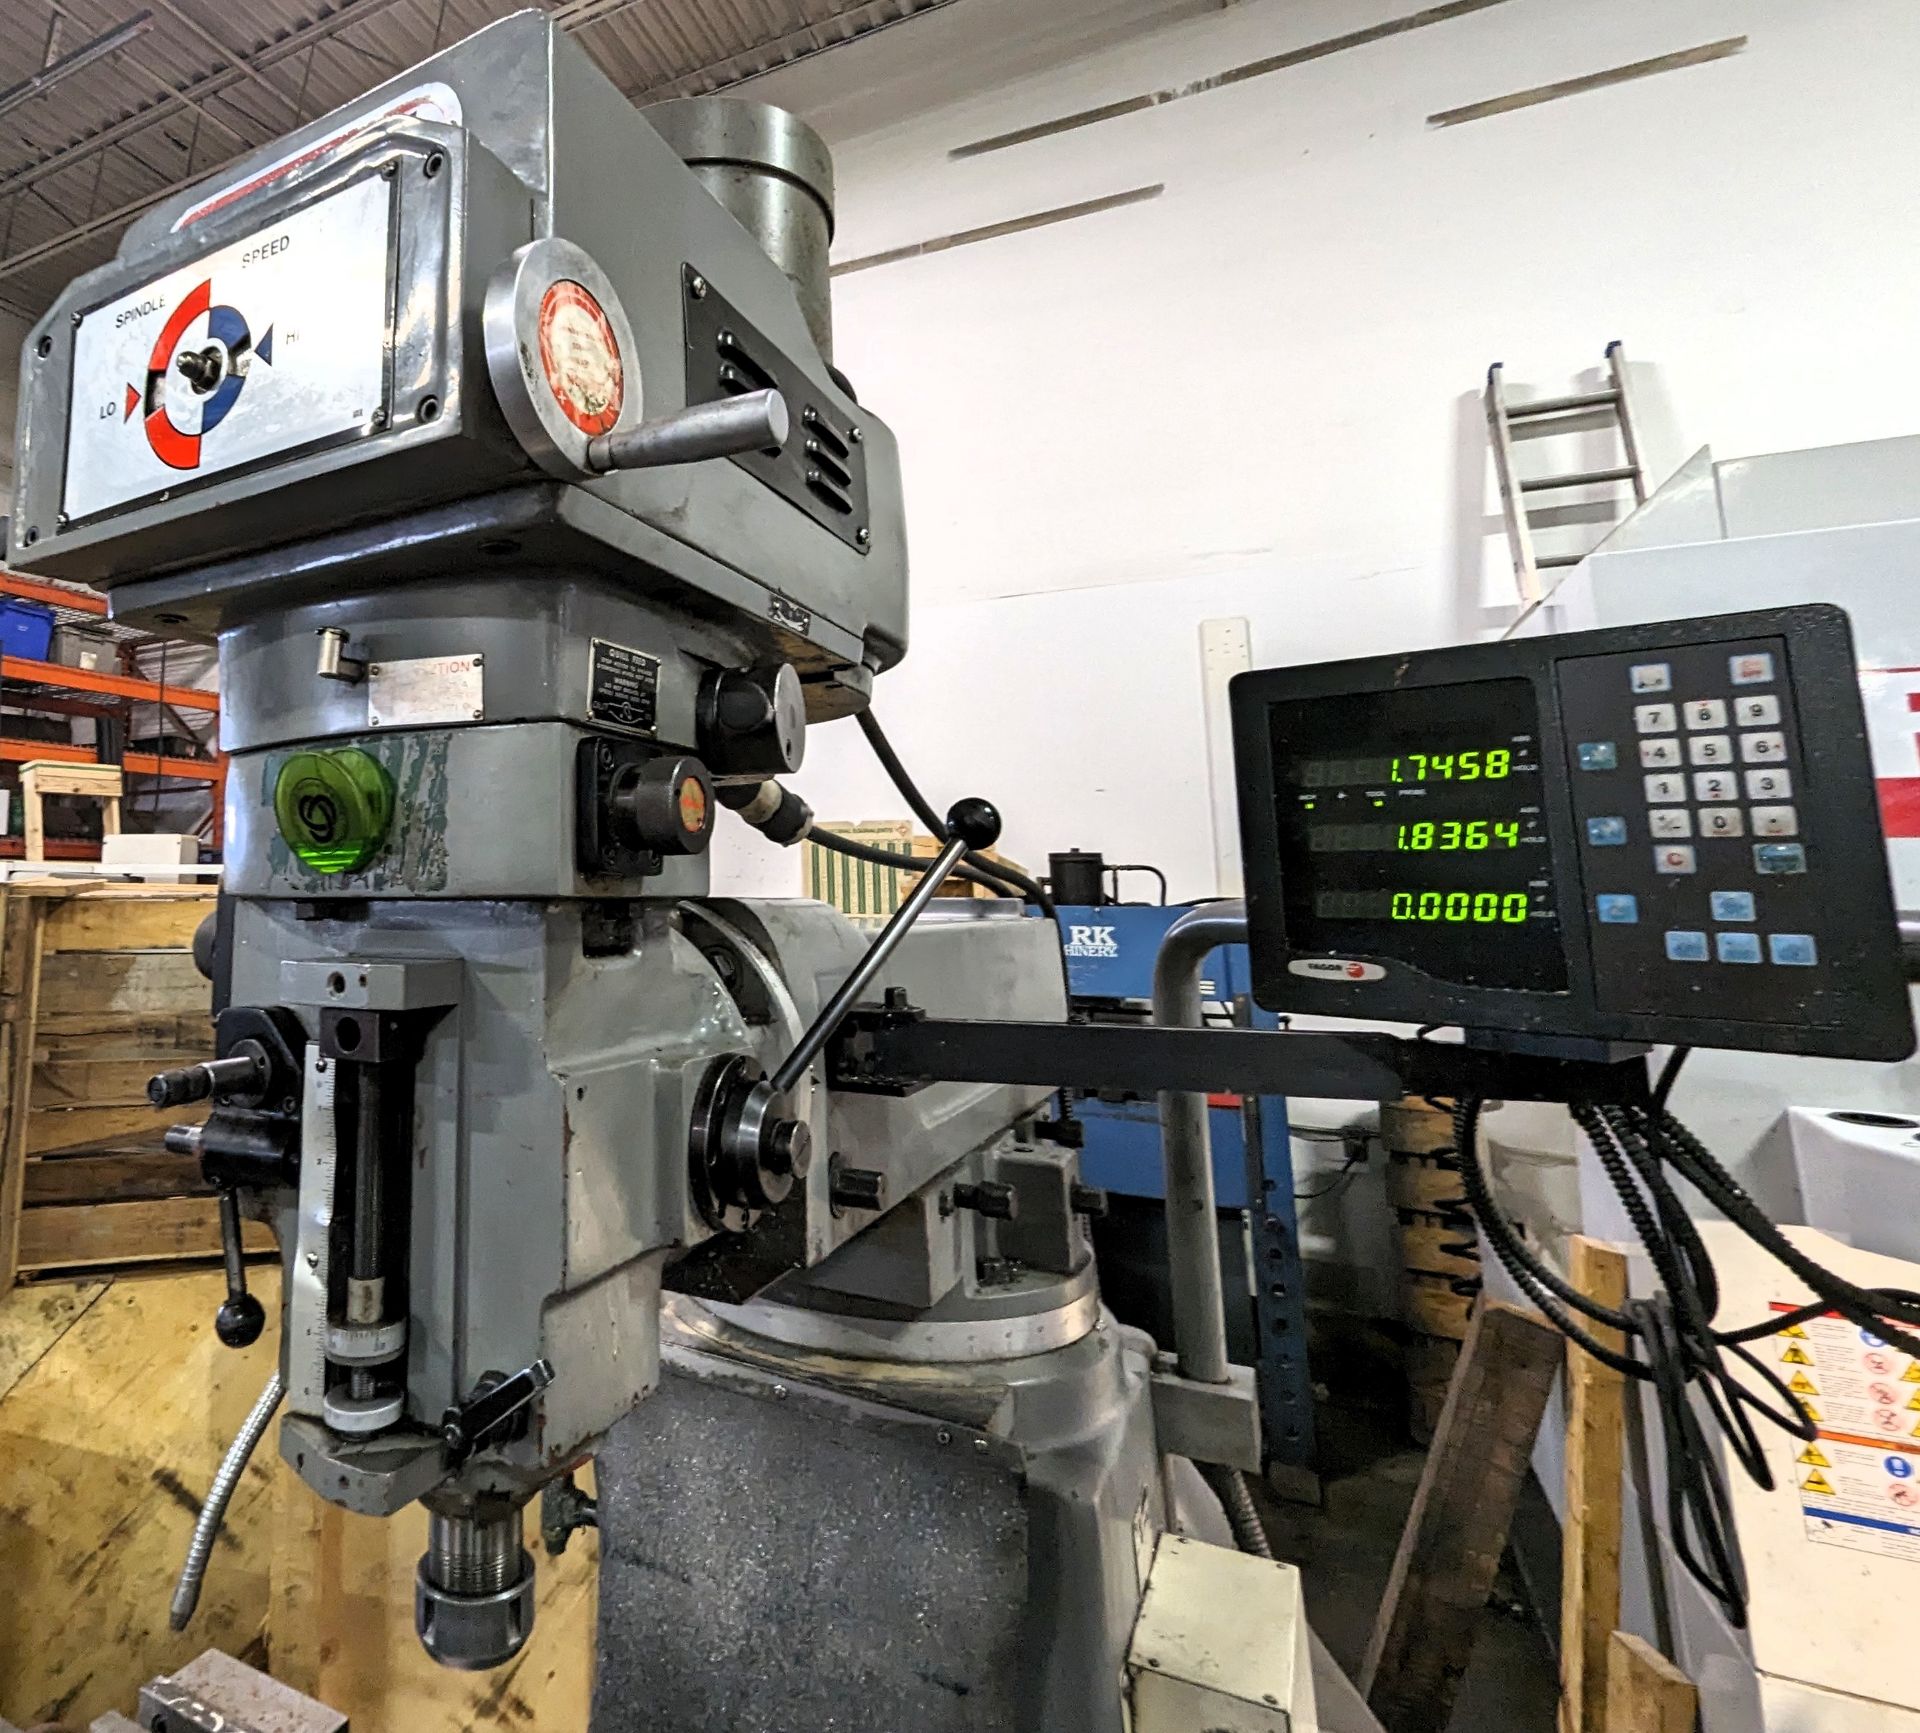 FULL MARK FM-18VS VERTICAL MILLING MACHINE, FAGOR 3-AXIS DRO, 40 TAPER, POWER X & Z FEEDS, 10” X 54” - Image 3 of 9